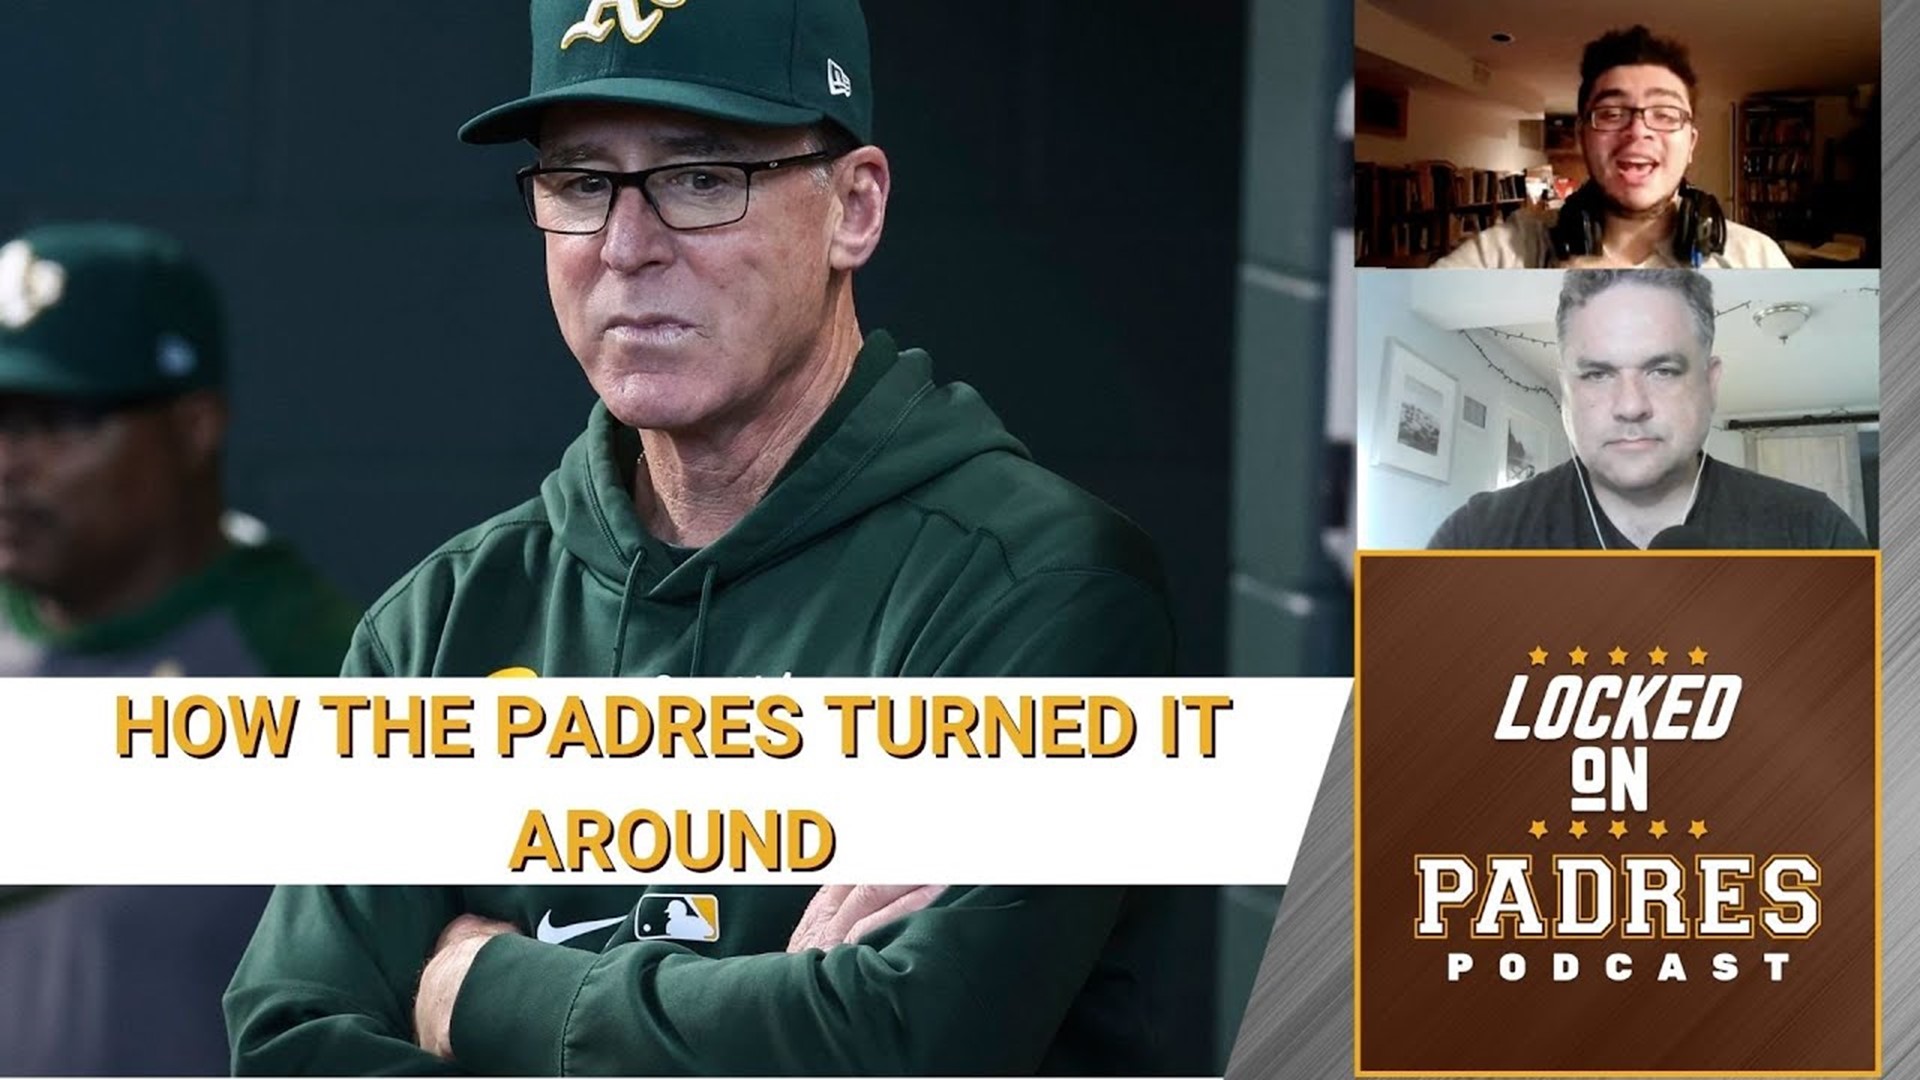 Javier discusses the Padres season and the narratives surrounding it, the hiring of Bob Melvin, the depth of the roster and Manny Machado's MVP candidacy.